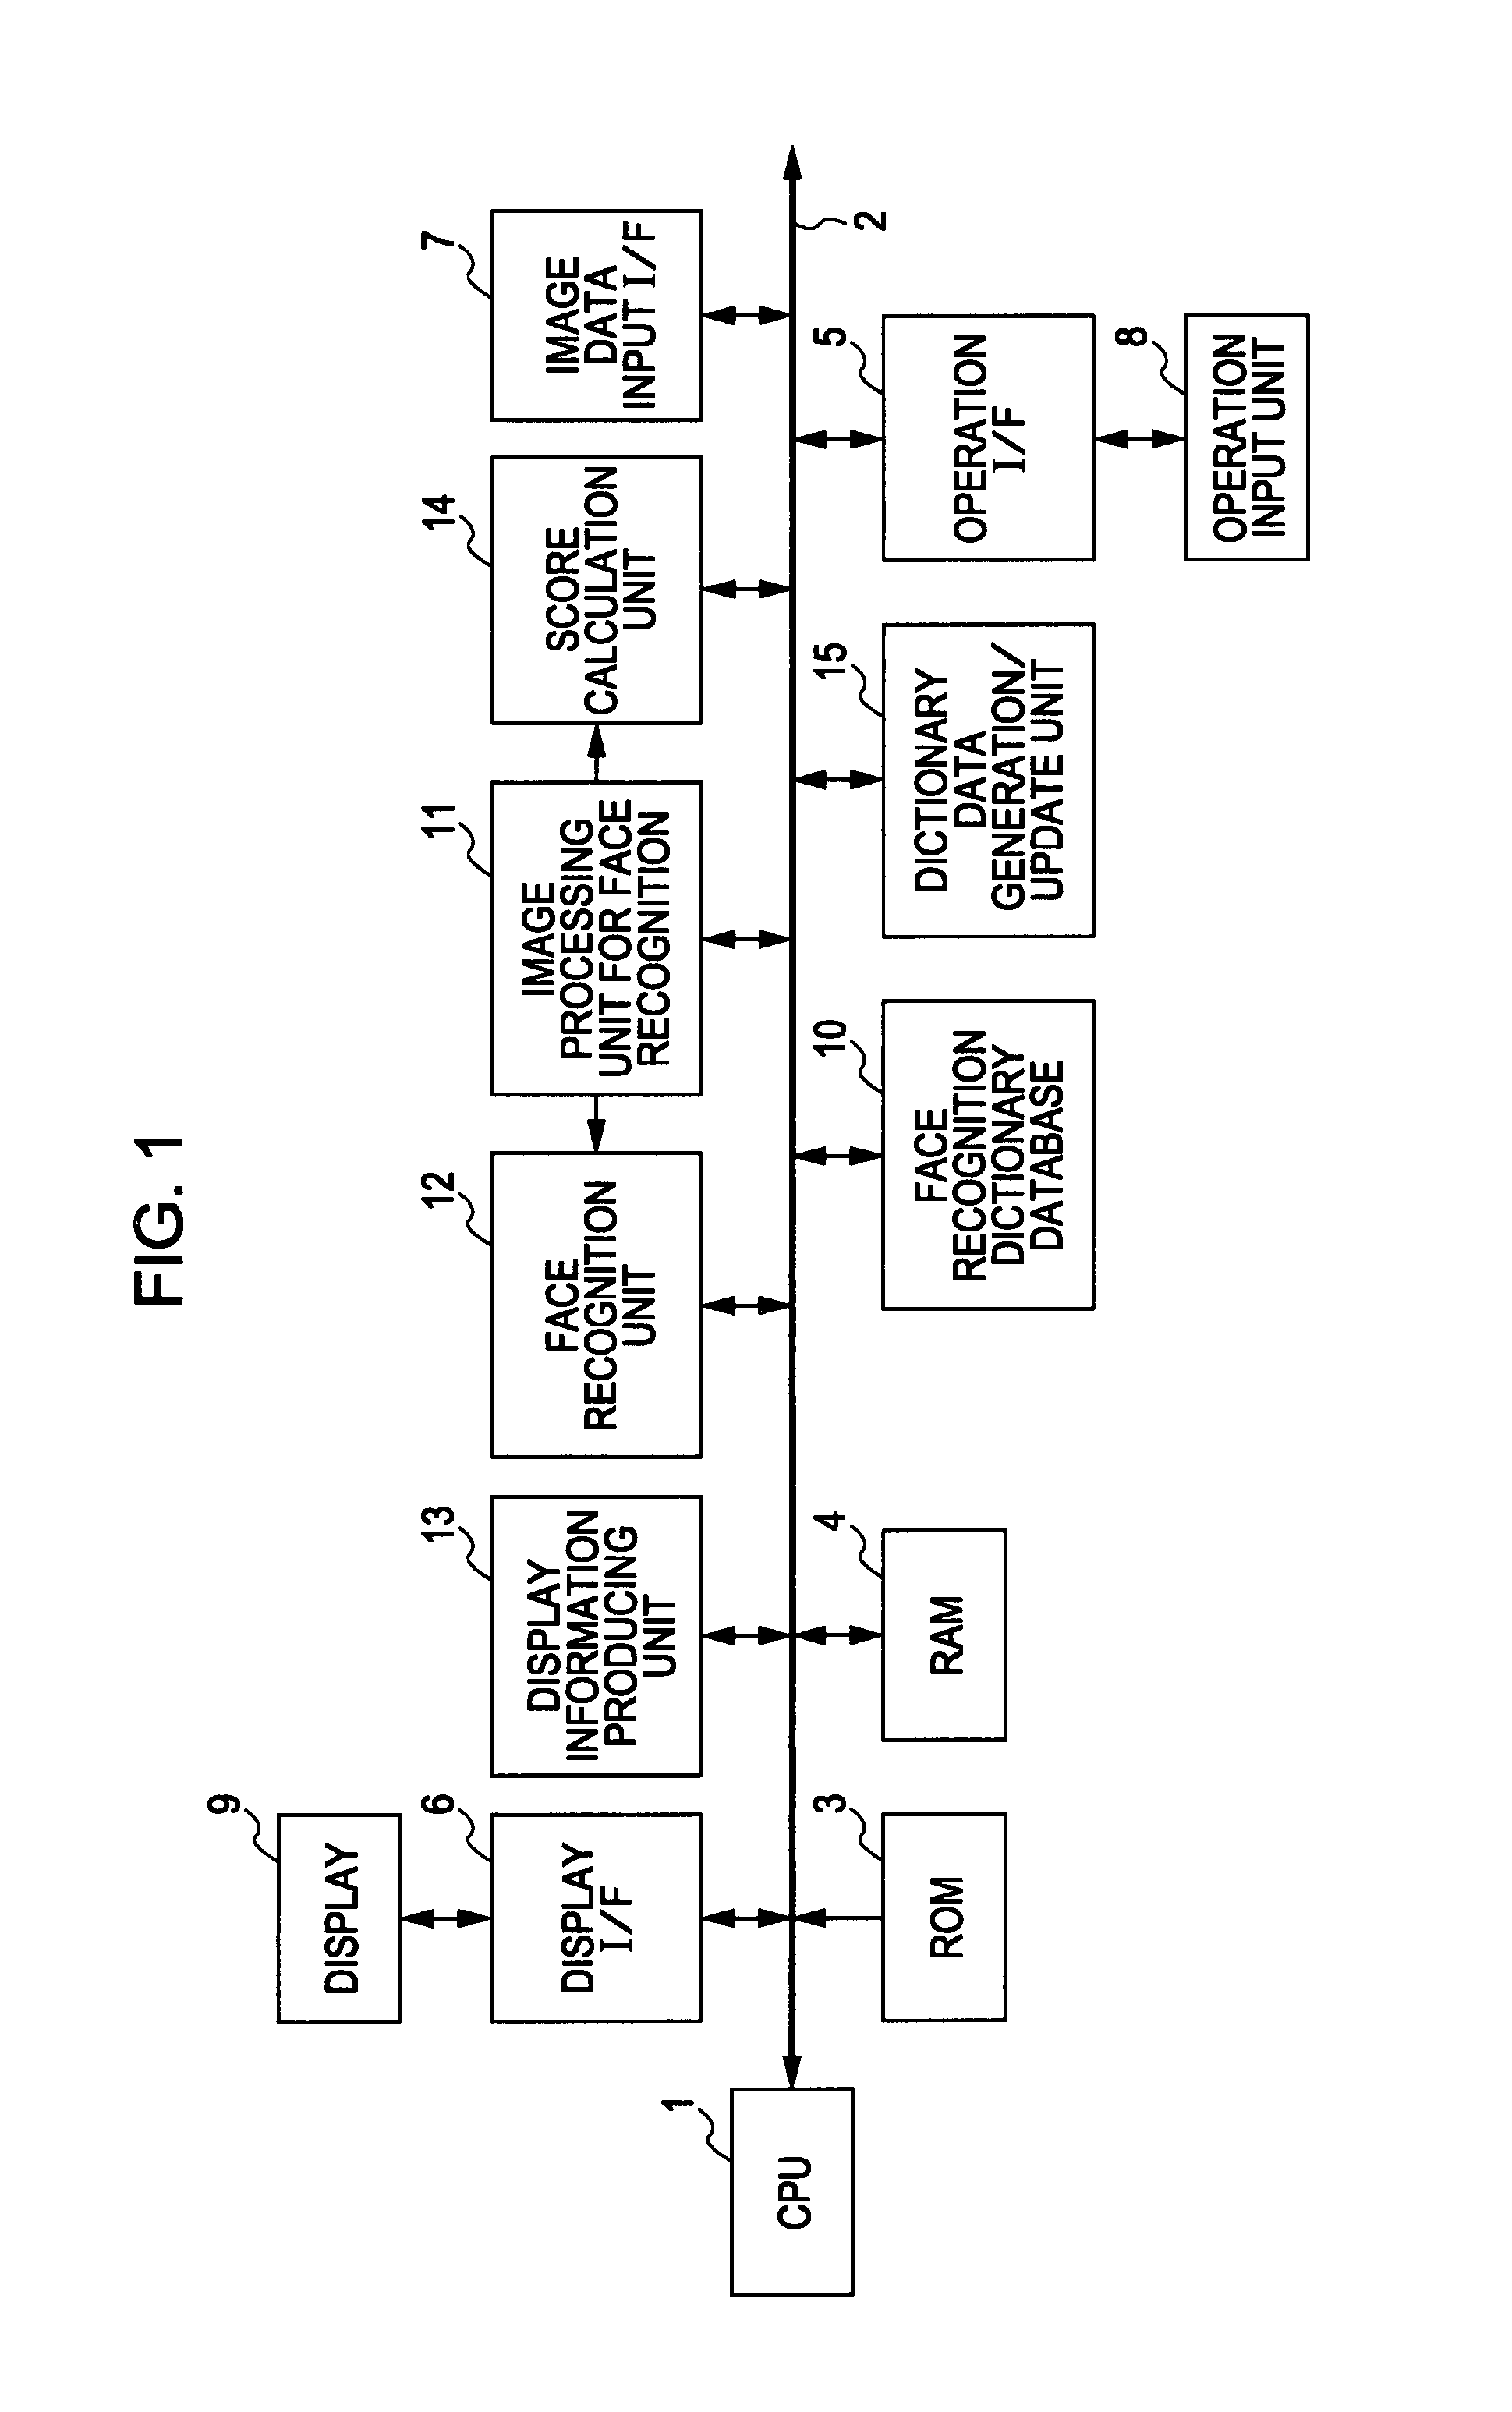 Apparatus for and method of using reliability information to produce and update image recognition data